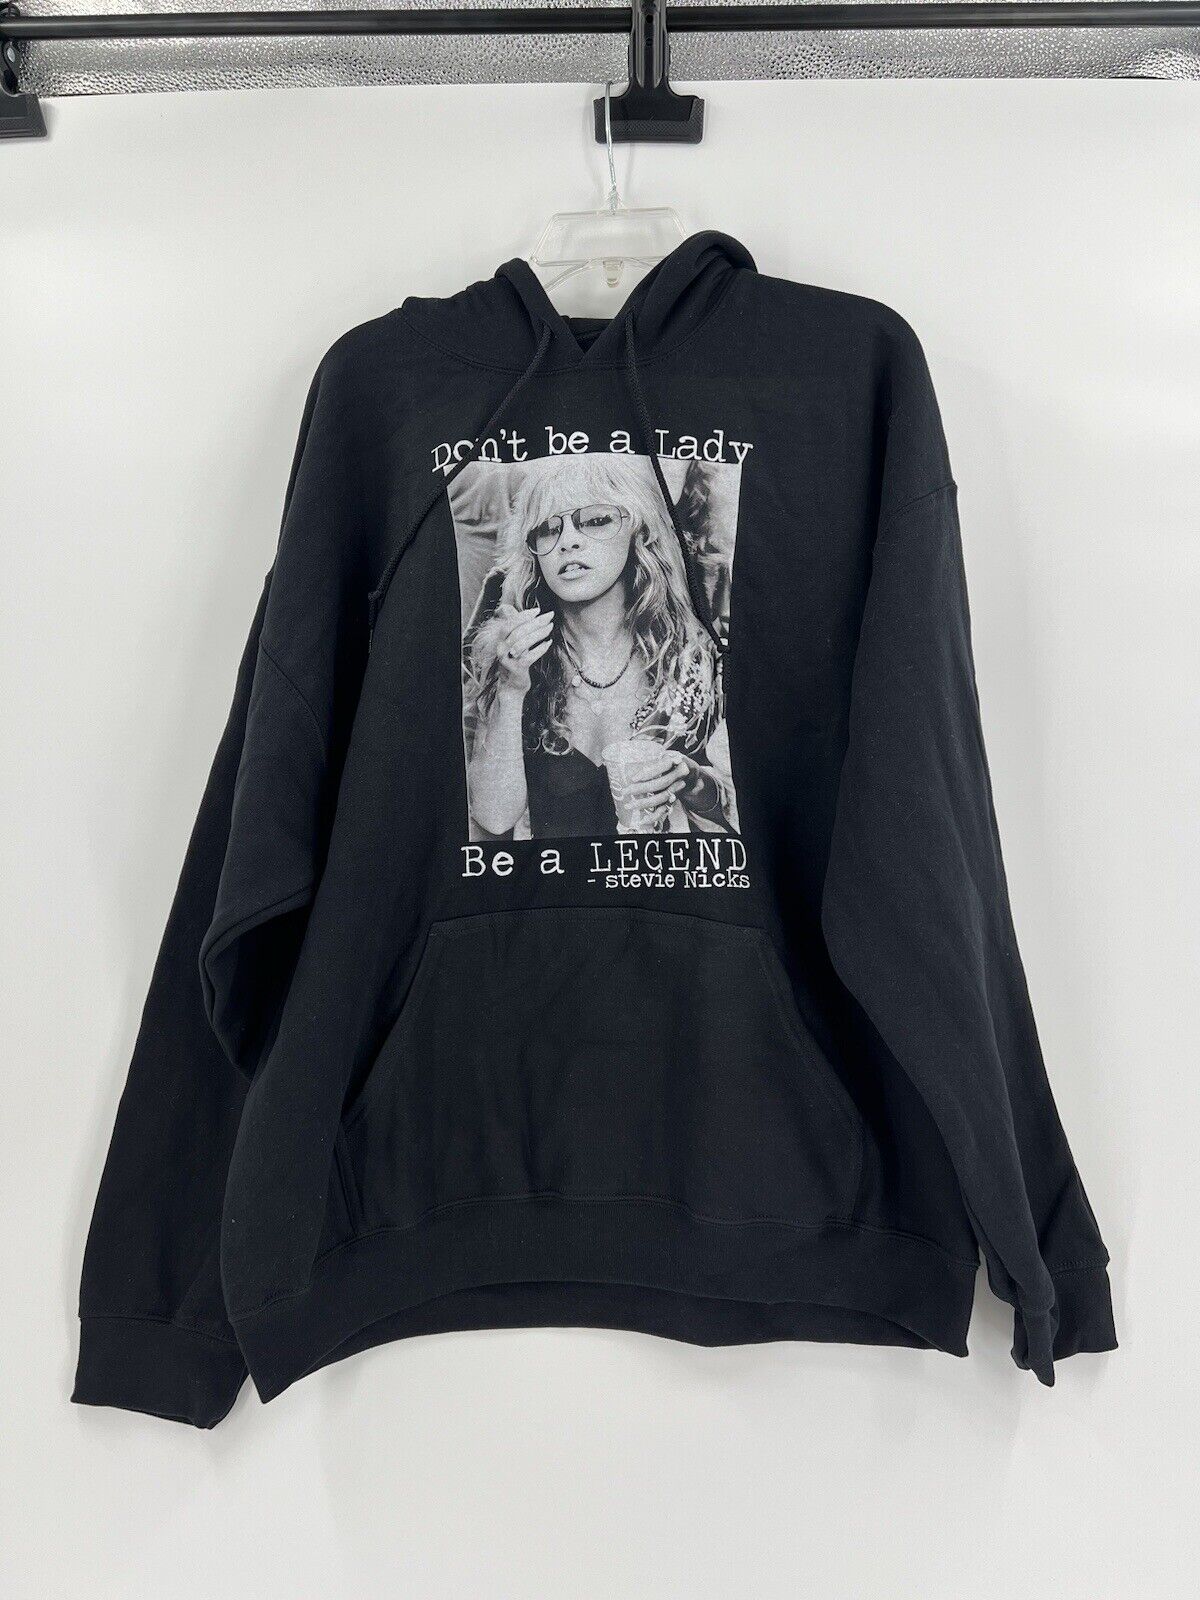 GILDAN STEVIE NICKS hoodie new without tags size XL